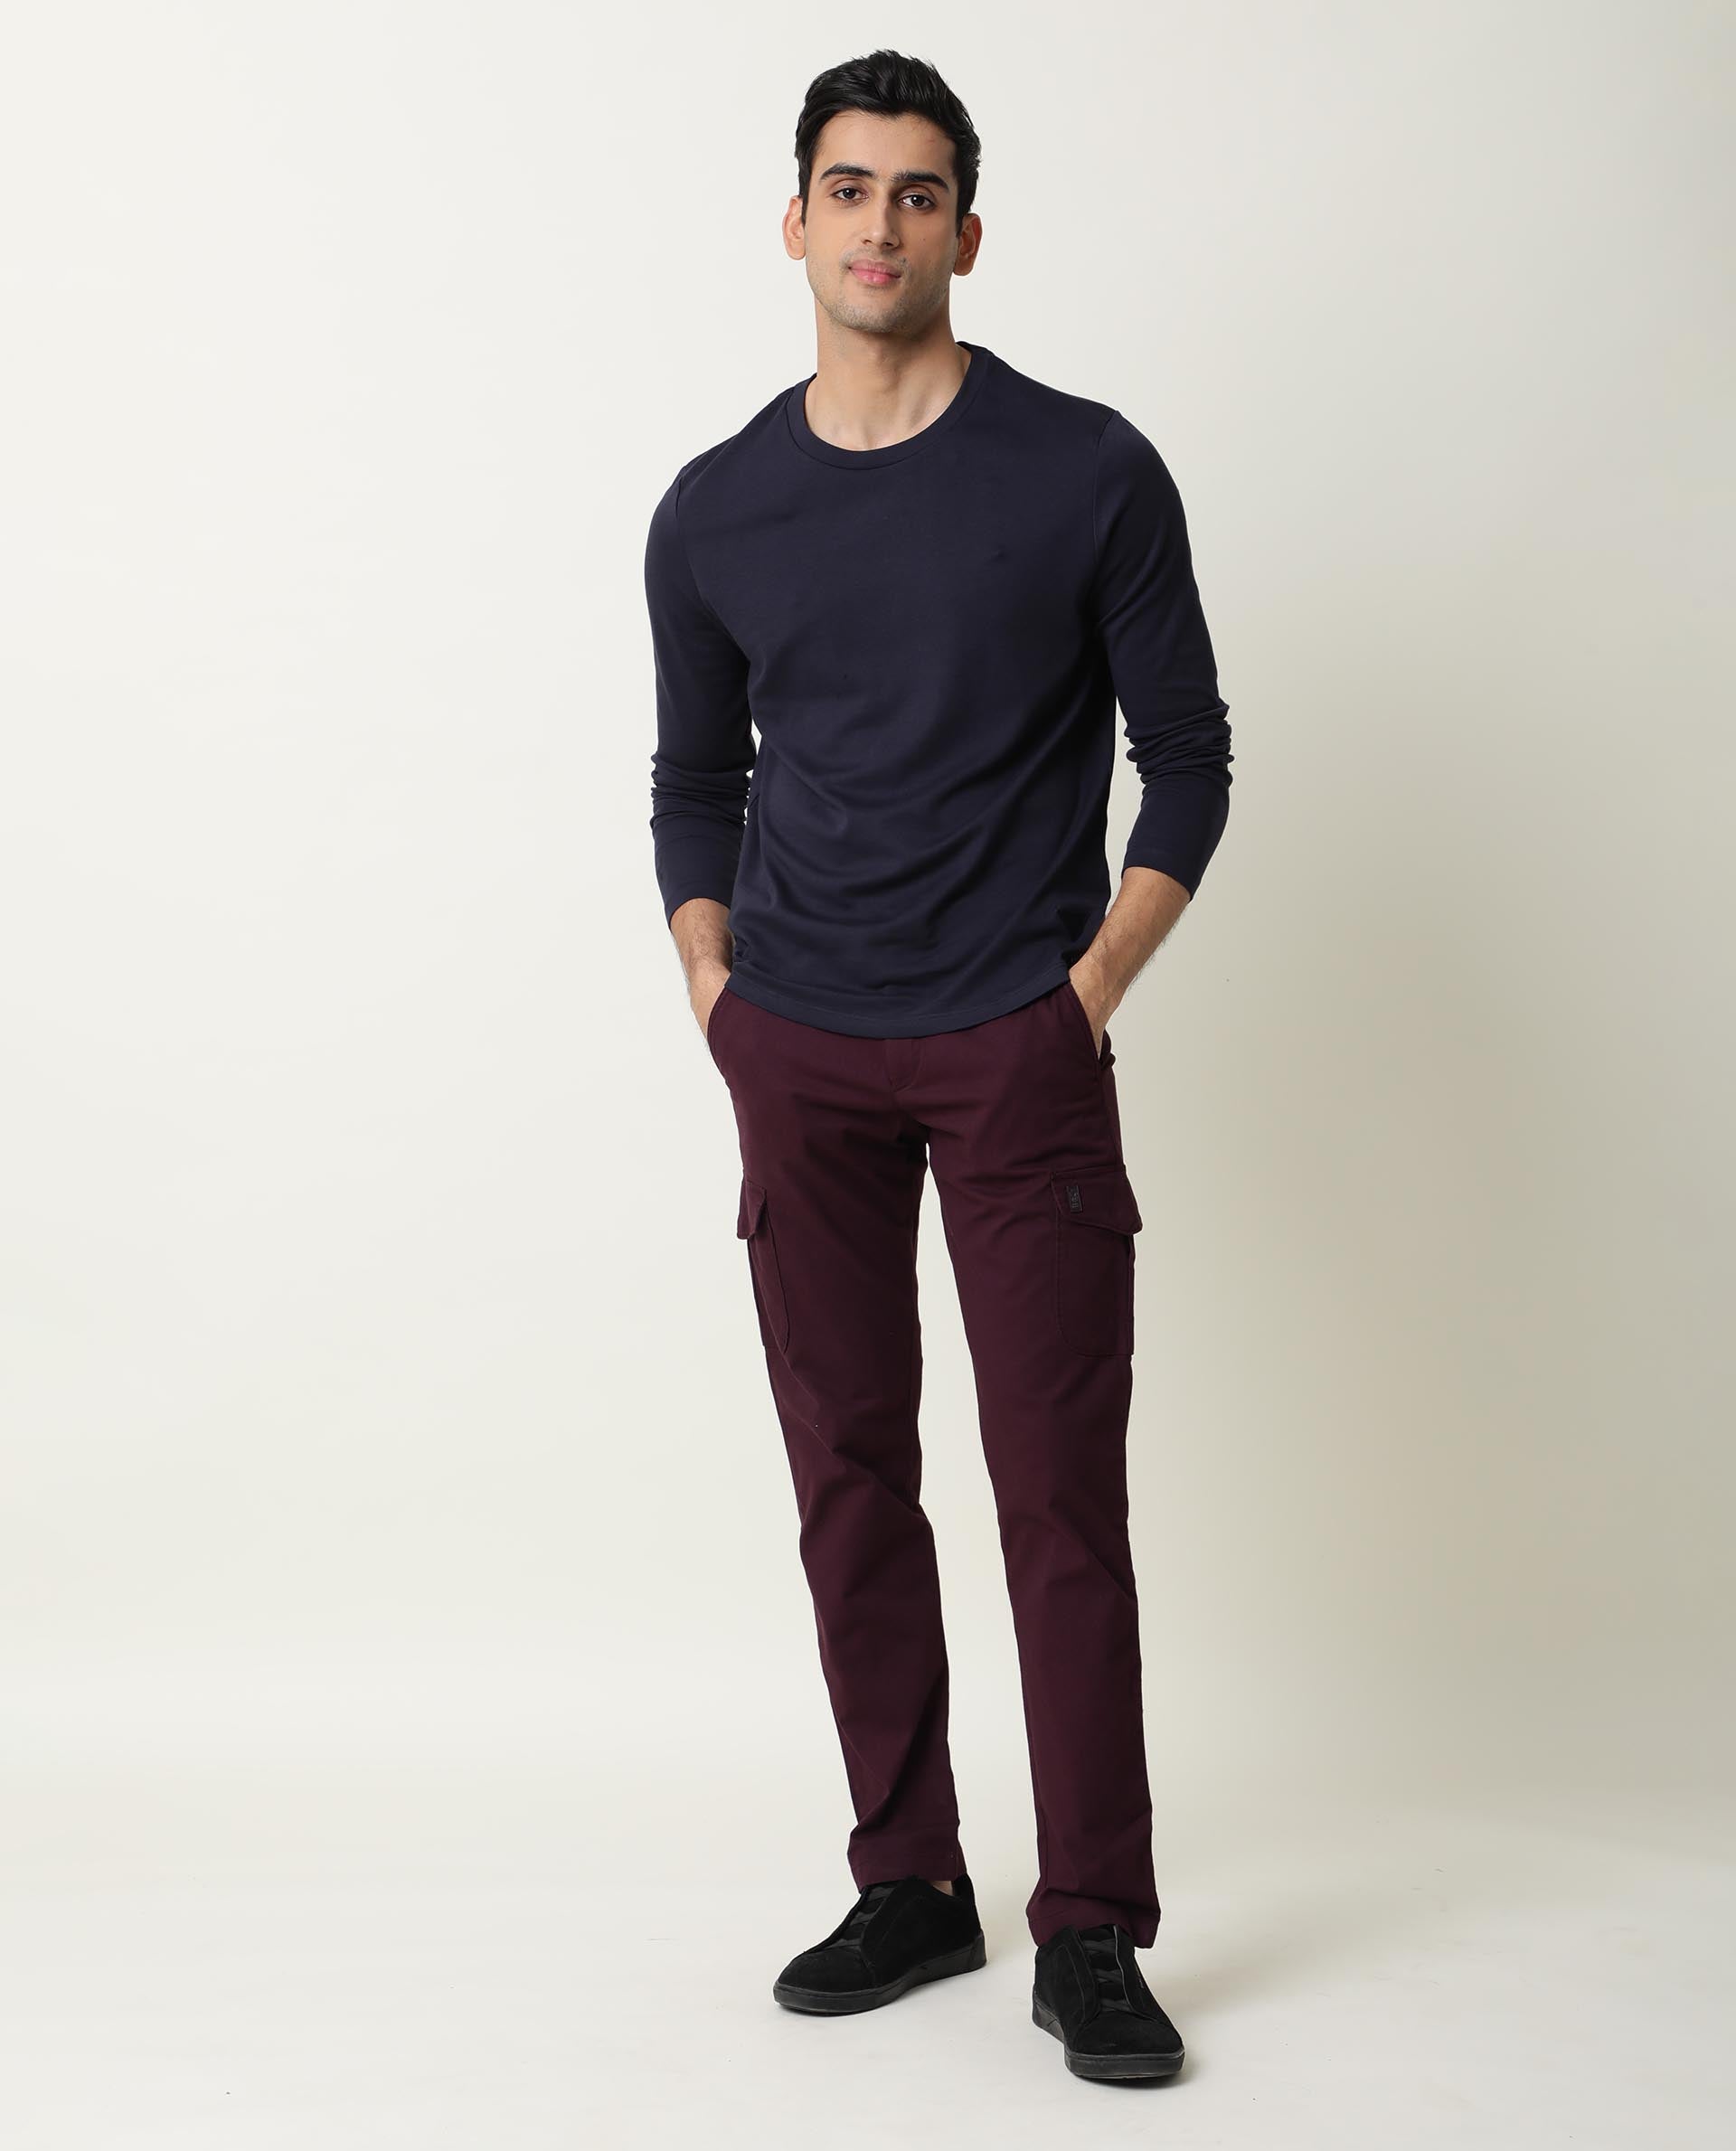 Burgundy Dress Pants with Blue Shirt Summer Outfits For Men (3 ideas &  outfits) | Lookastic